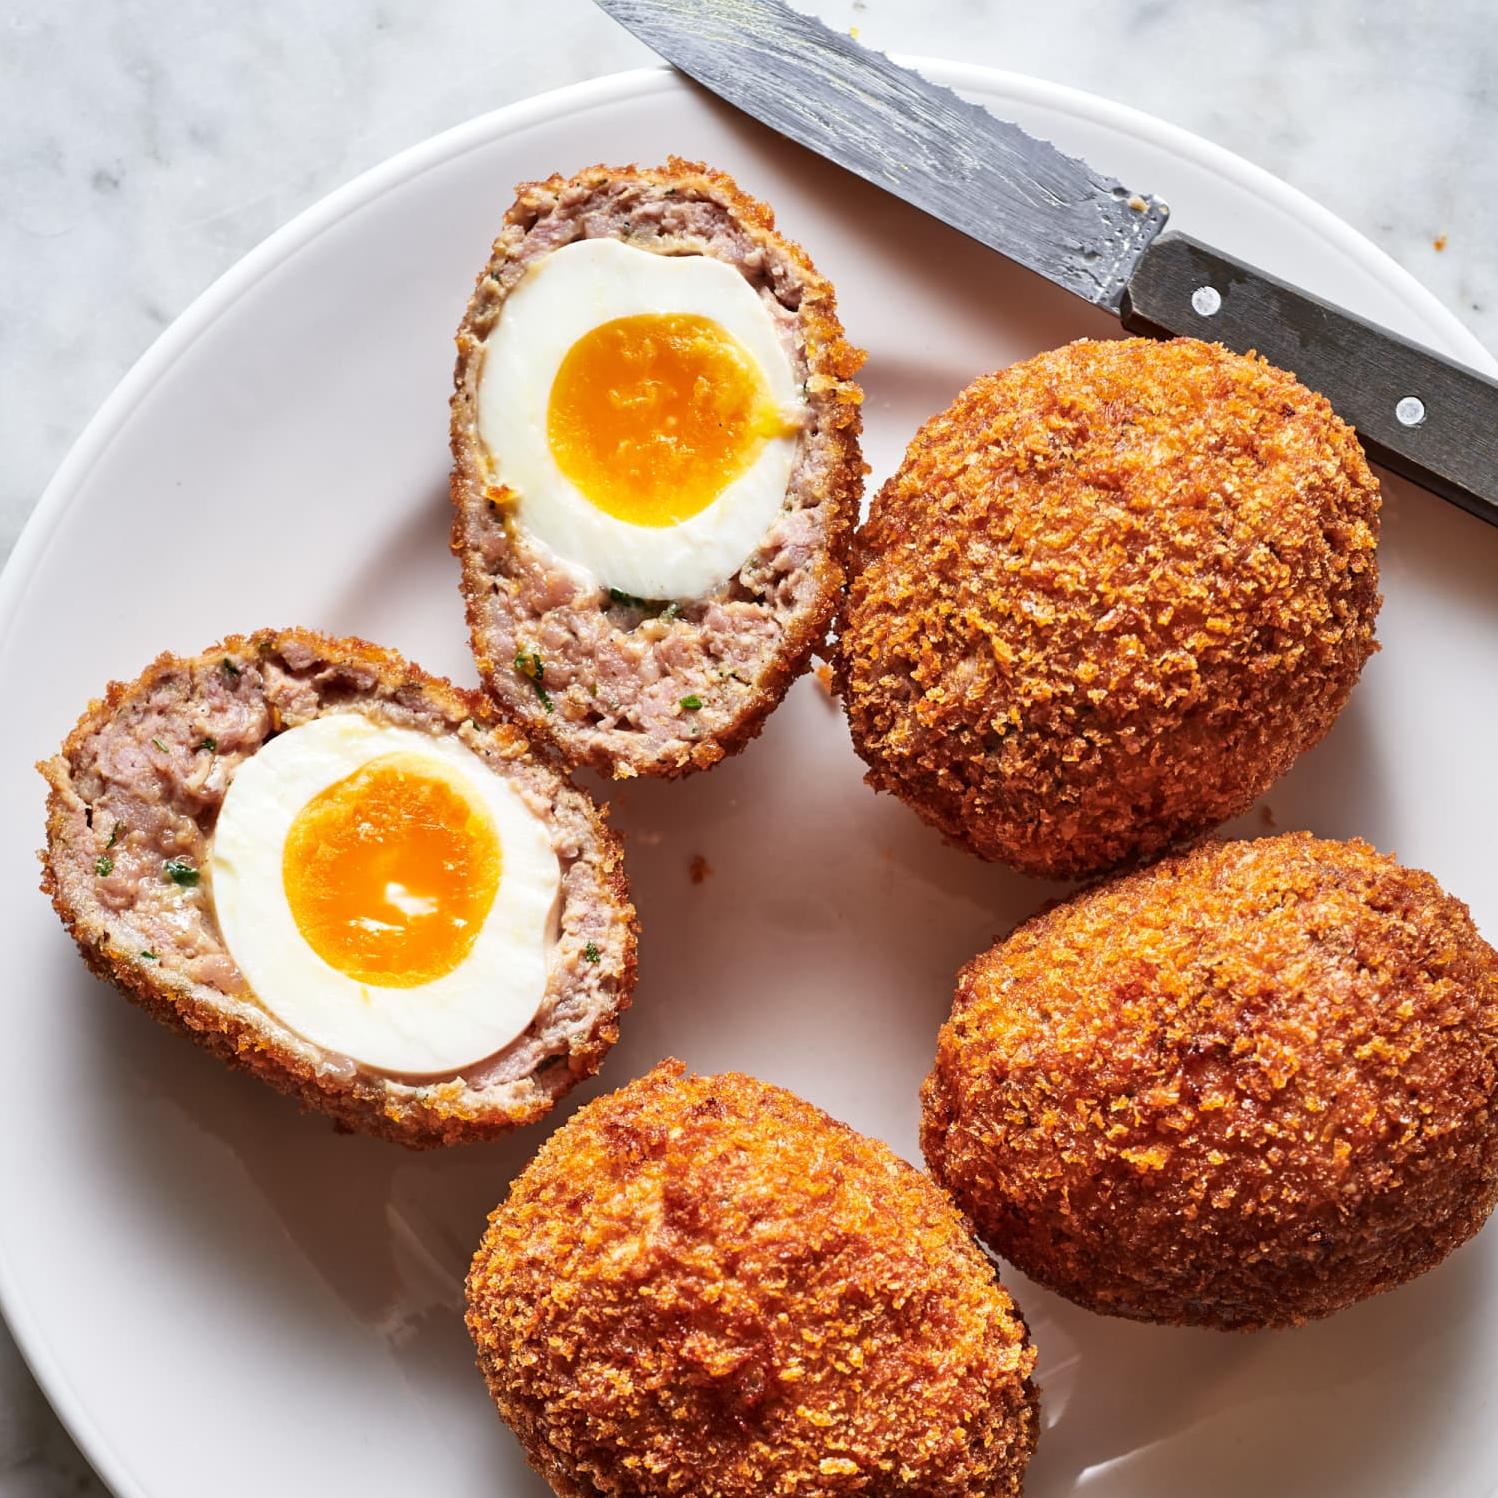  These golden beauties are my special oven style Scotch eggs.